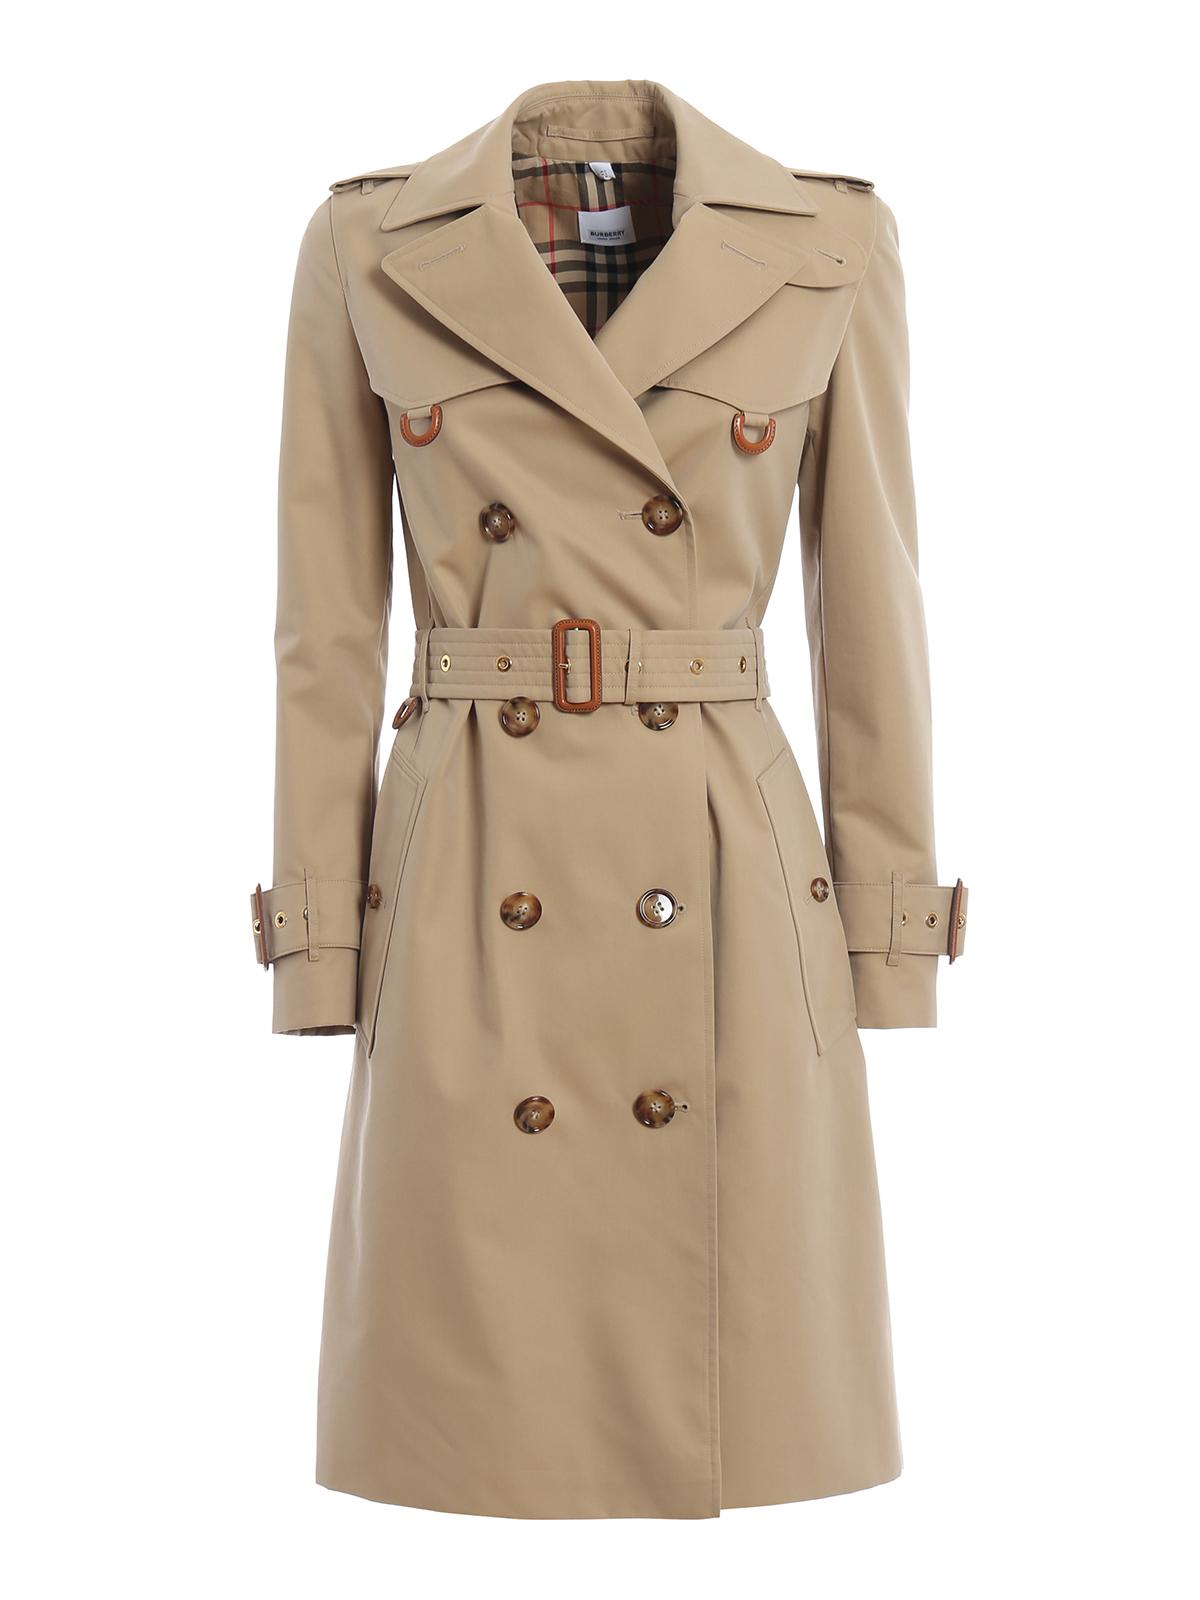 Burberry Cotton Islington Classic Trench Coat in Beige (Natural) - Lyst